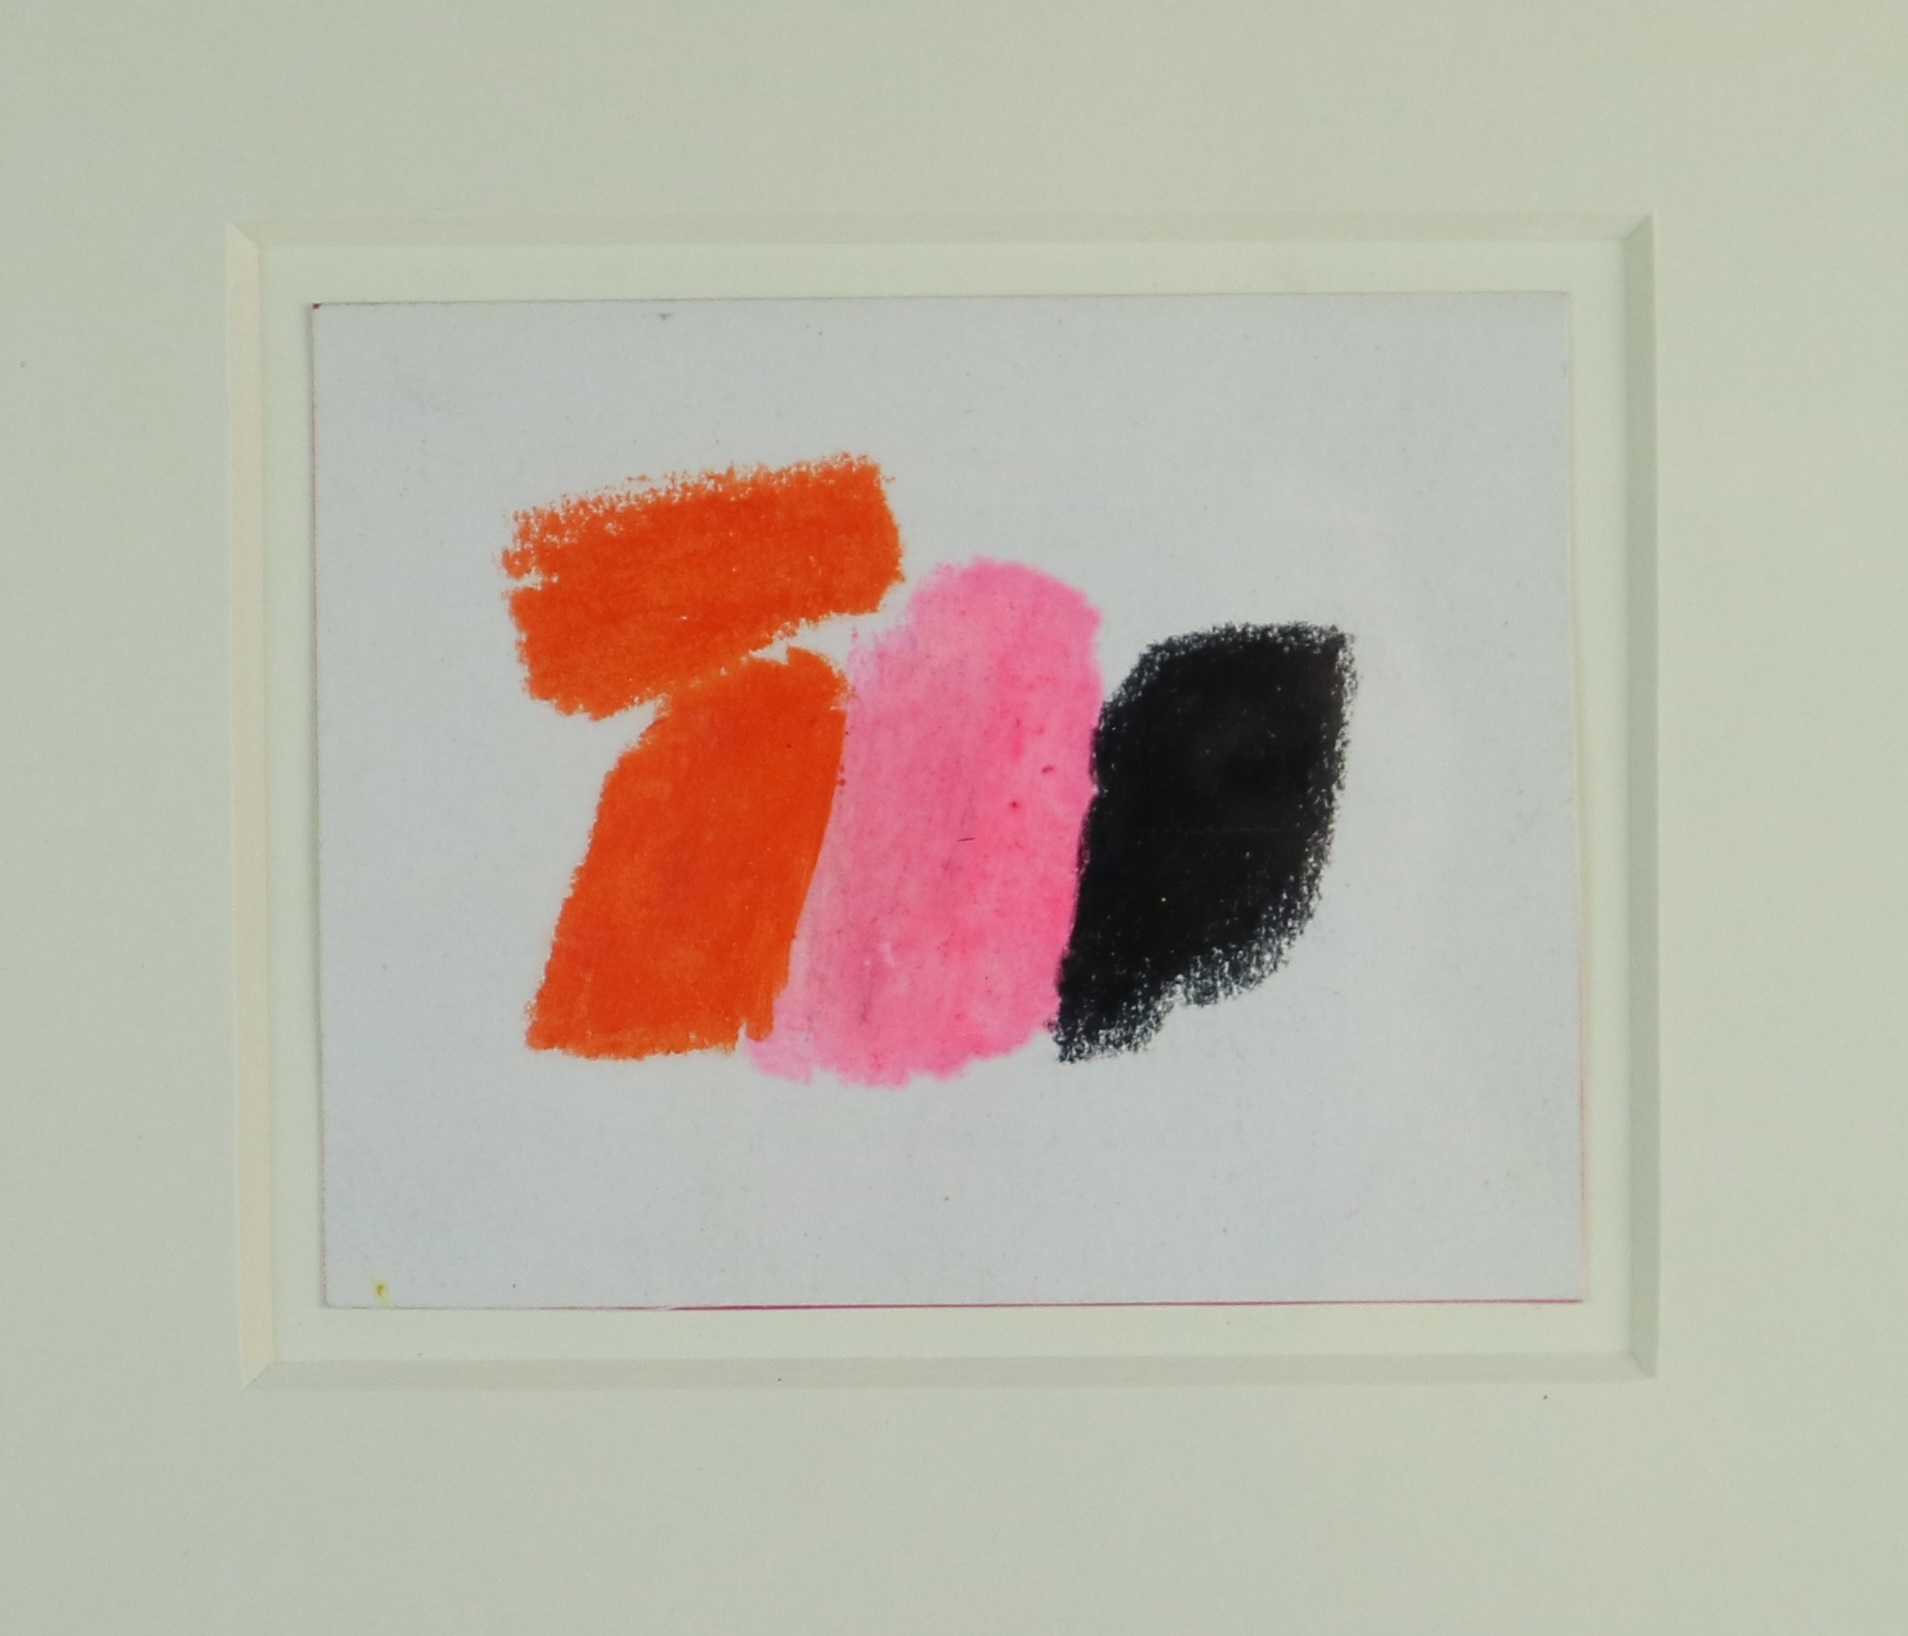 Bernard Farmer (British 1919-2002) Red and Black Abstract, pencil and crayon, measurements 10 x 13.5 - Image 2 of 5